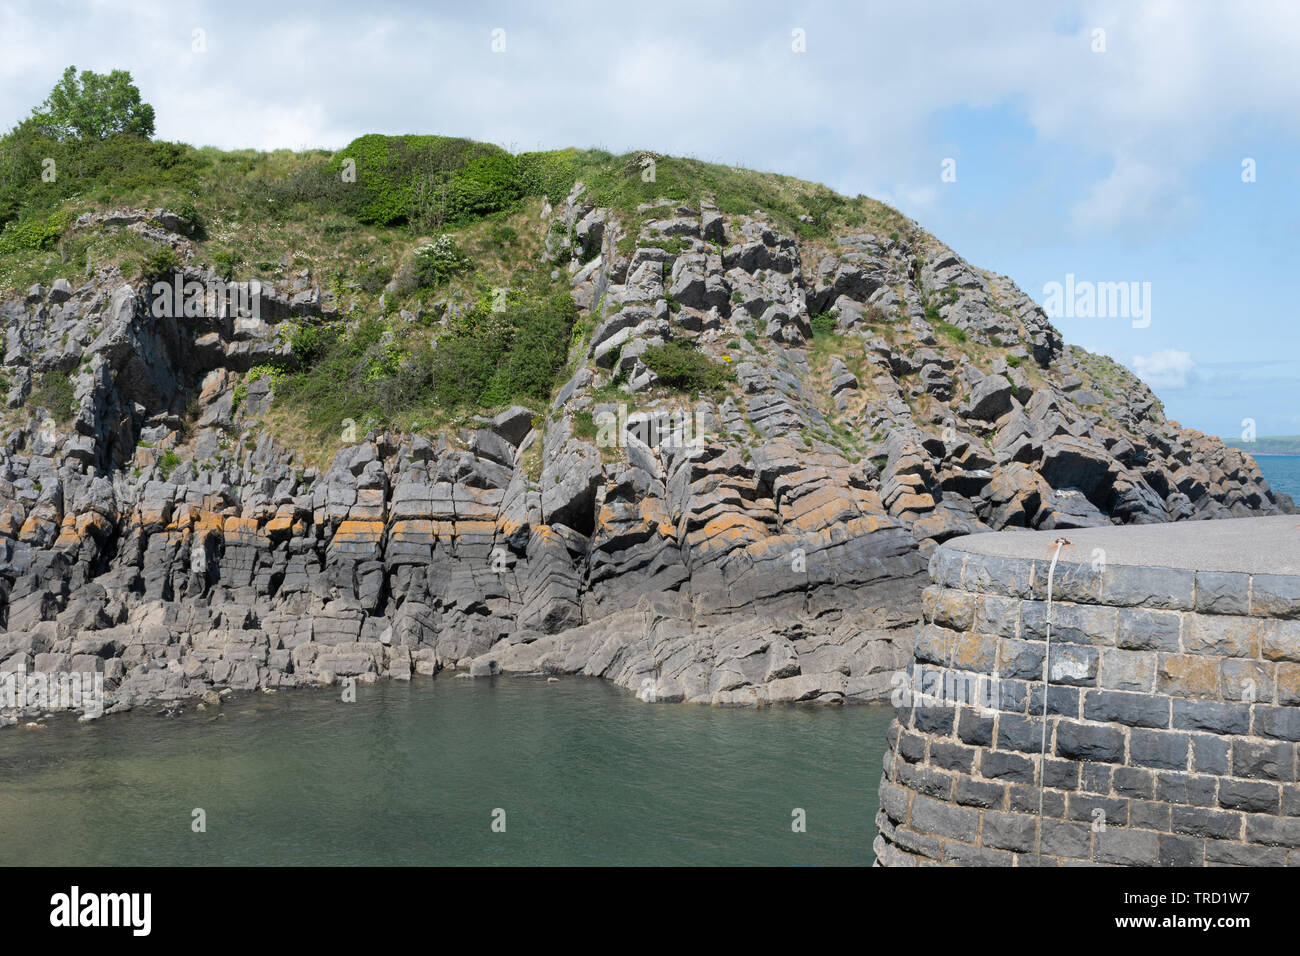 Stackpole Quay, the smallest harbour in Pembrokeshire, Wales. Pembrokeshire coastal scenery and cliffs. Stock Photo